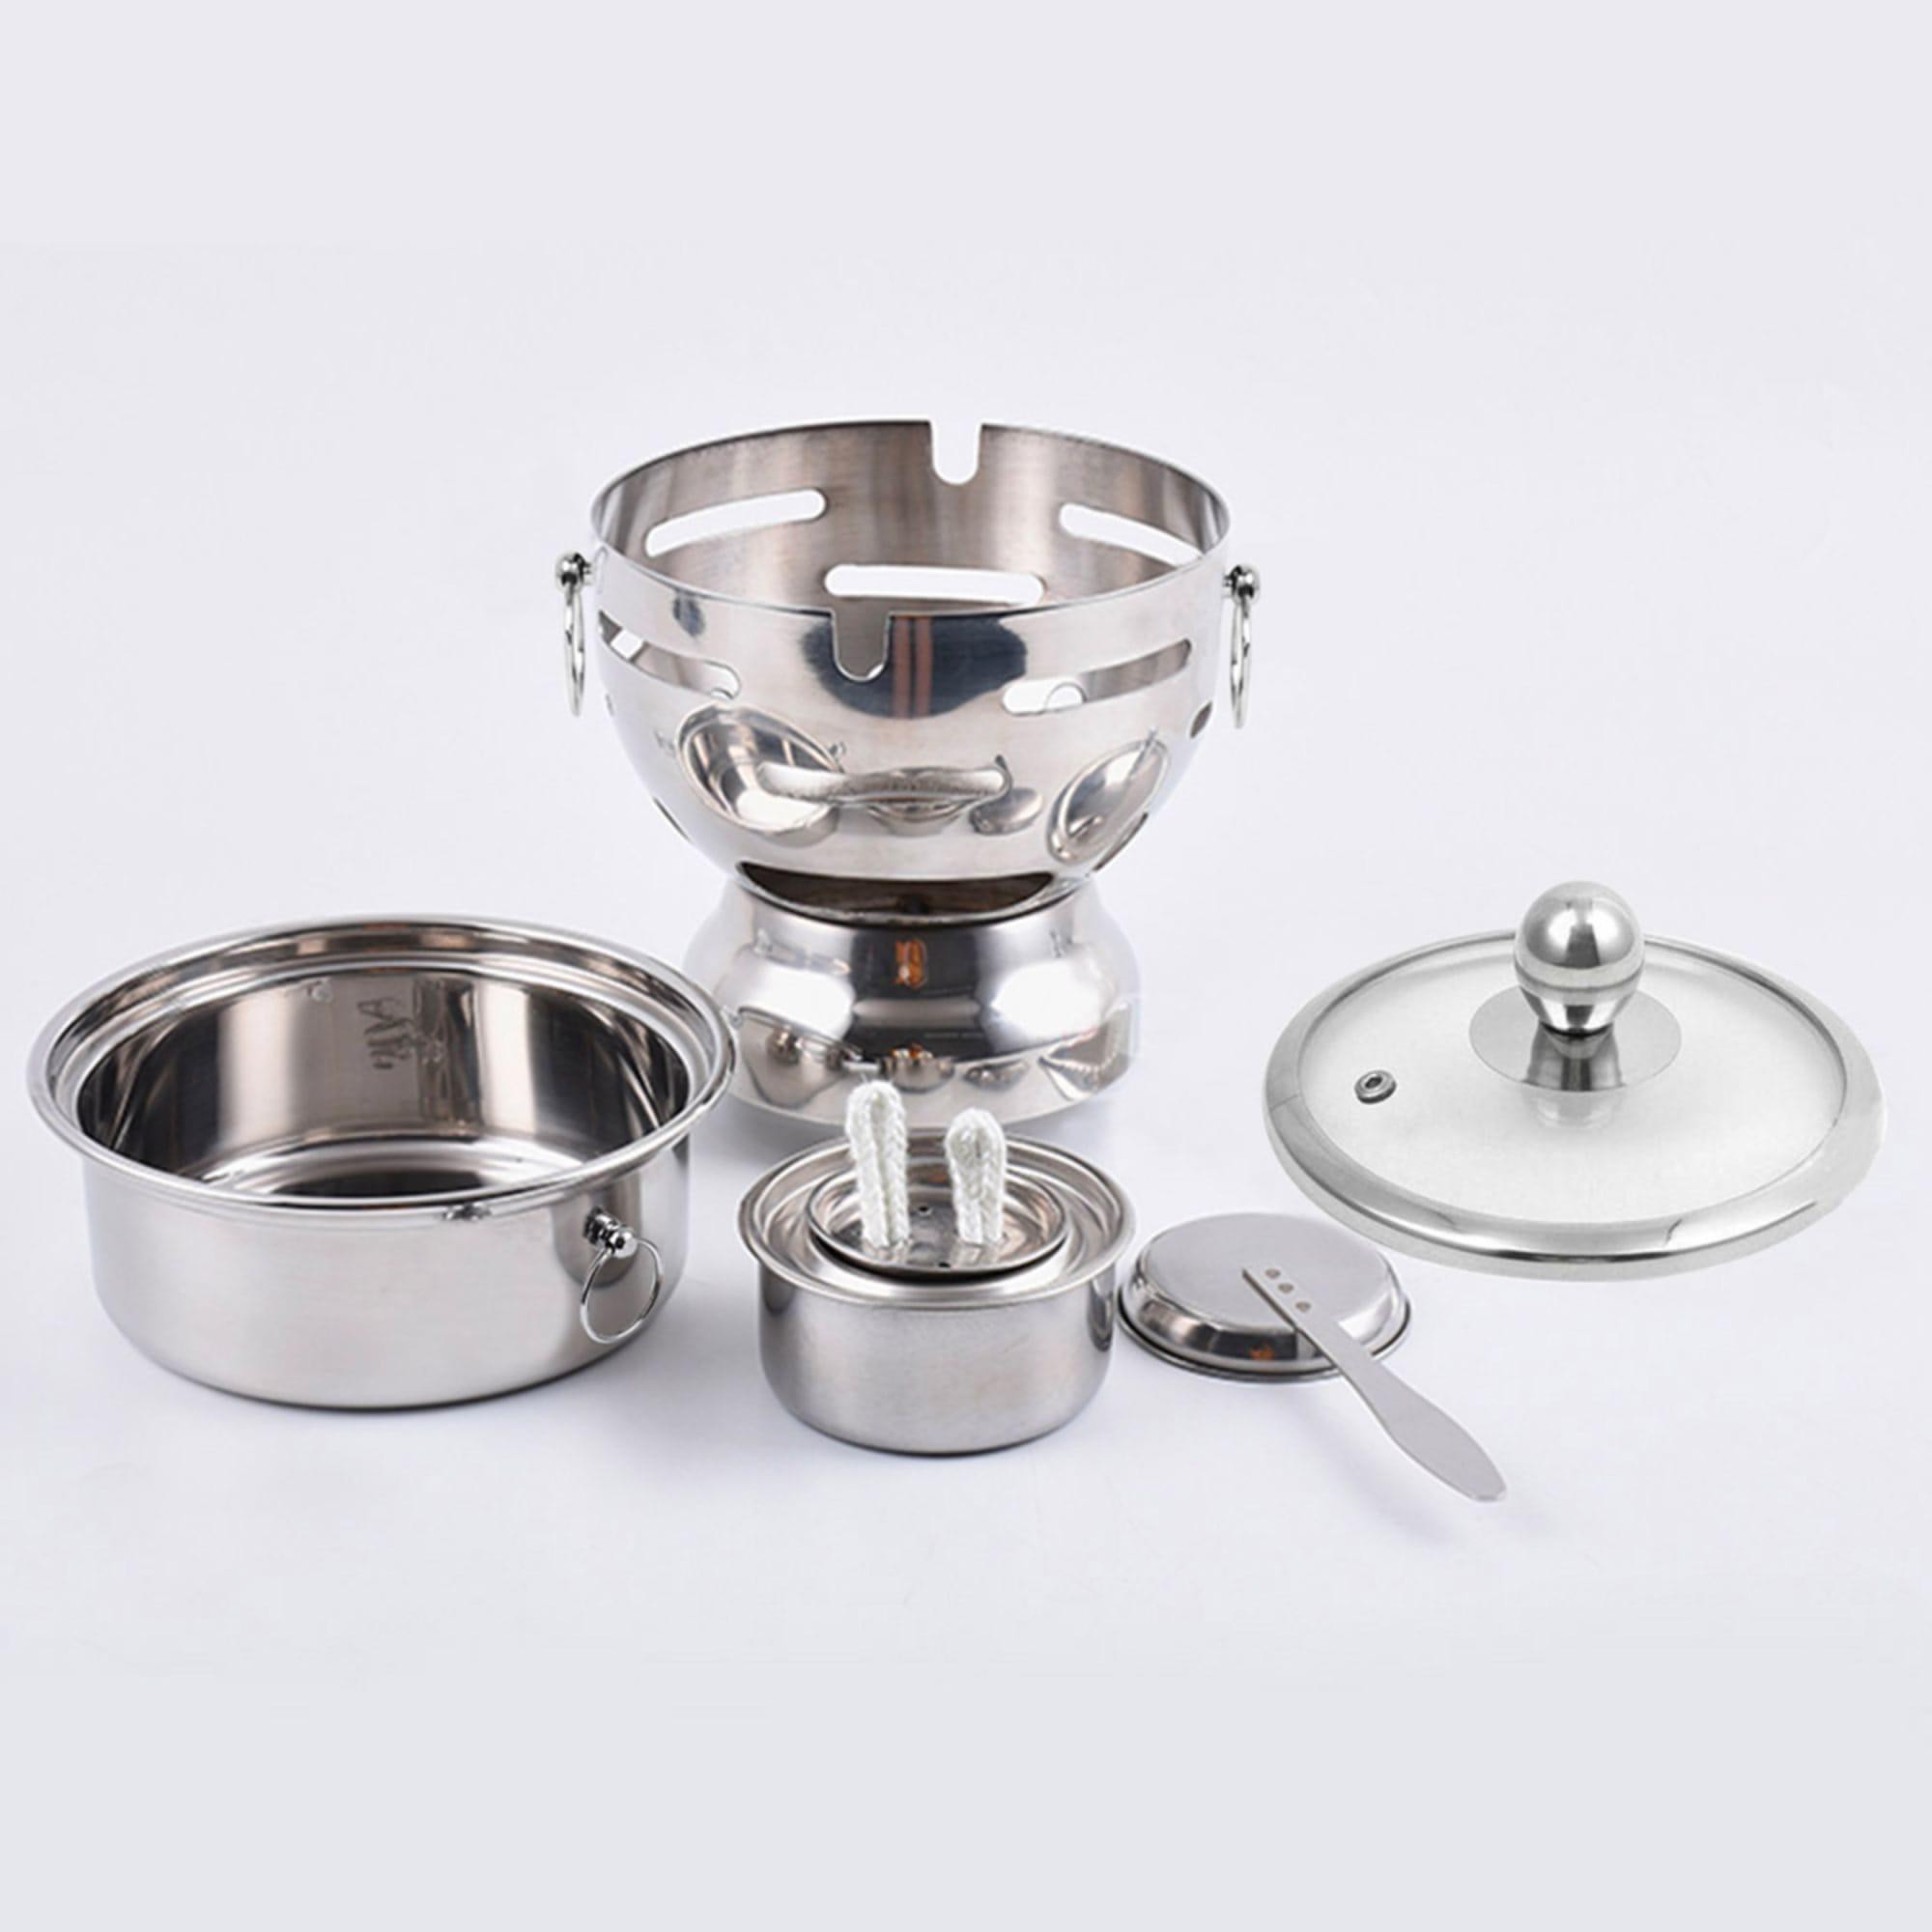 Soga Round Stainless Steel Single Hot Pot with Glass Lid 18.5cm Set of 4 Image 5